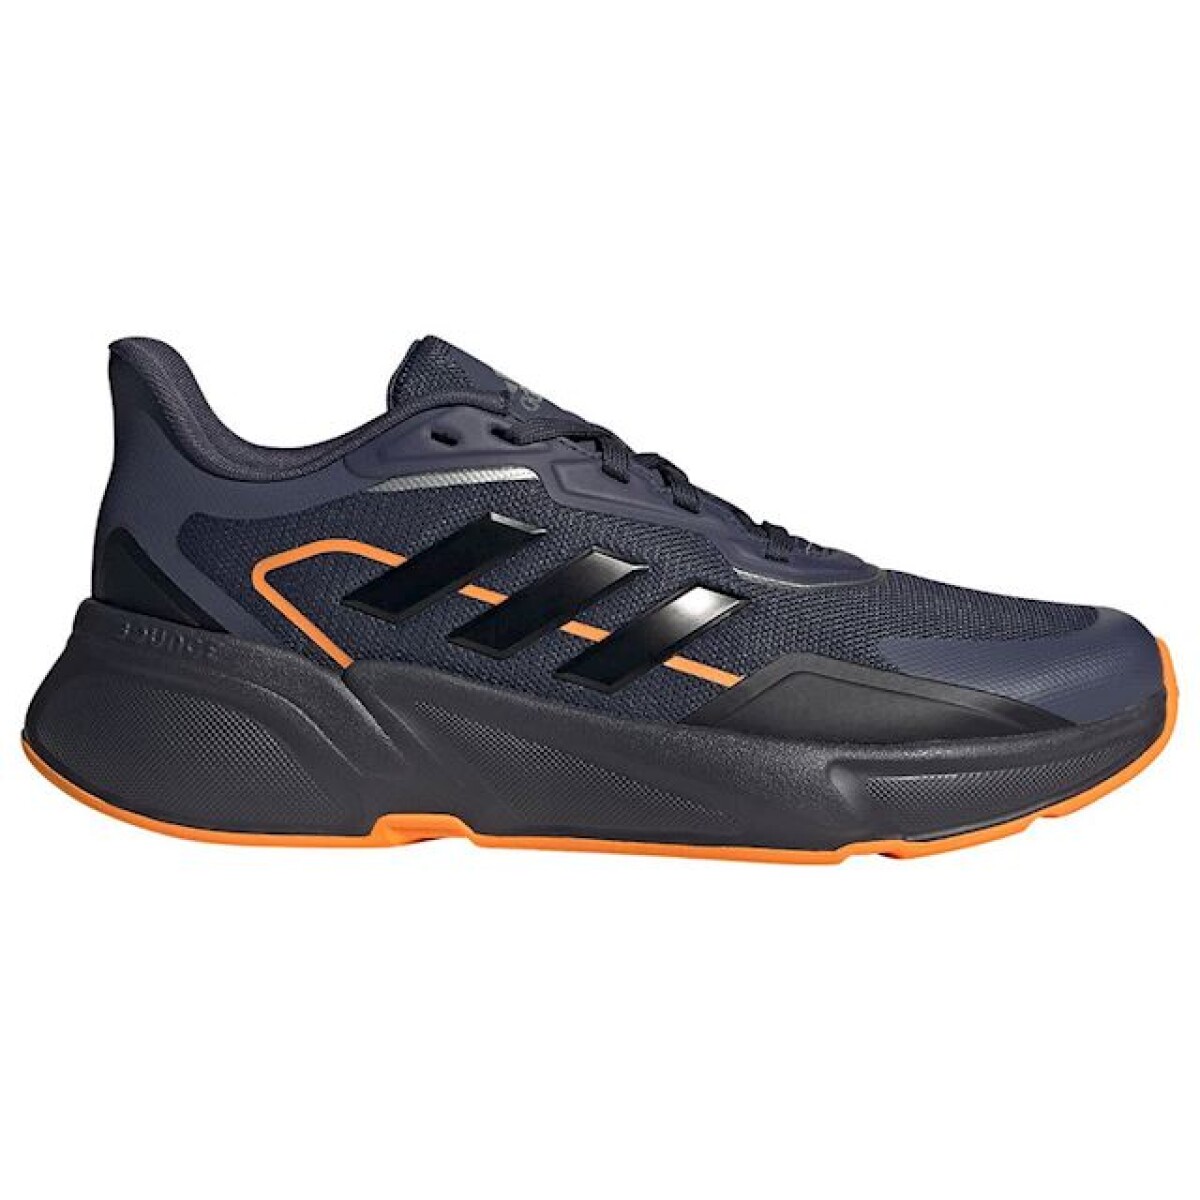 Champion Adidas Running Hombre shoes X9000l1 - Color Único 